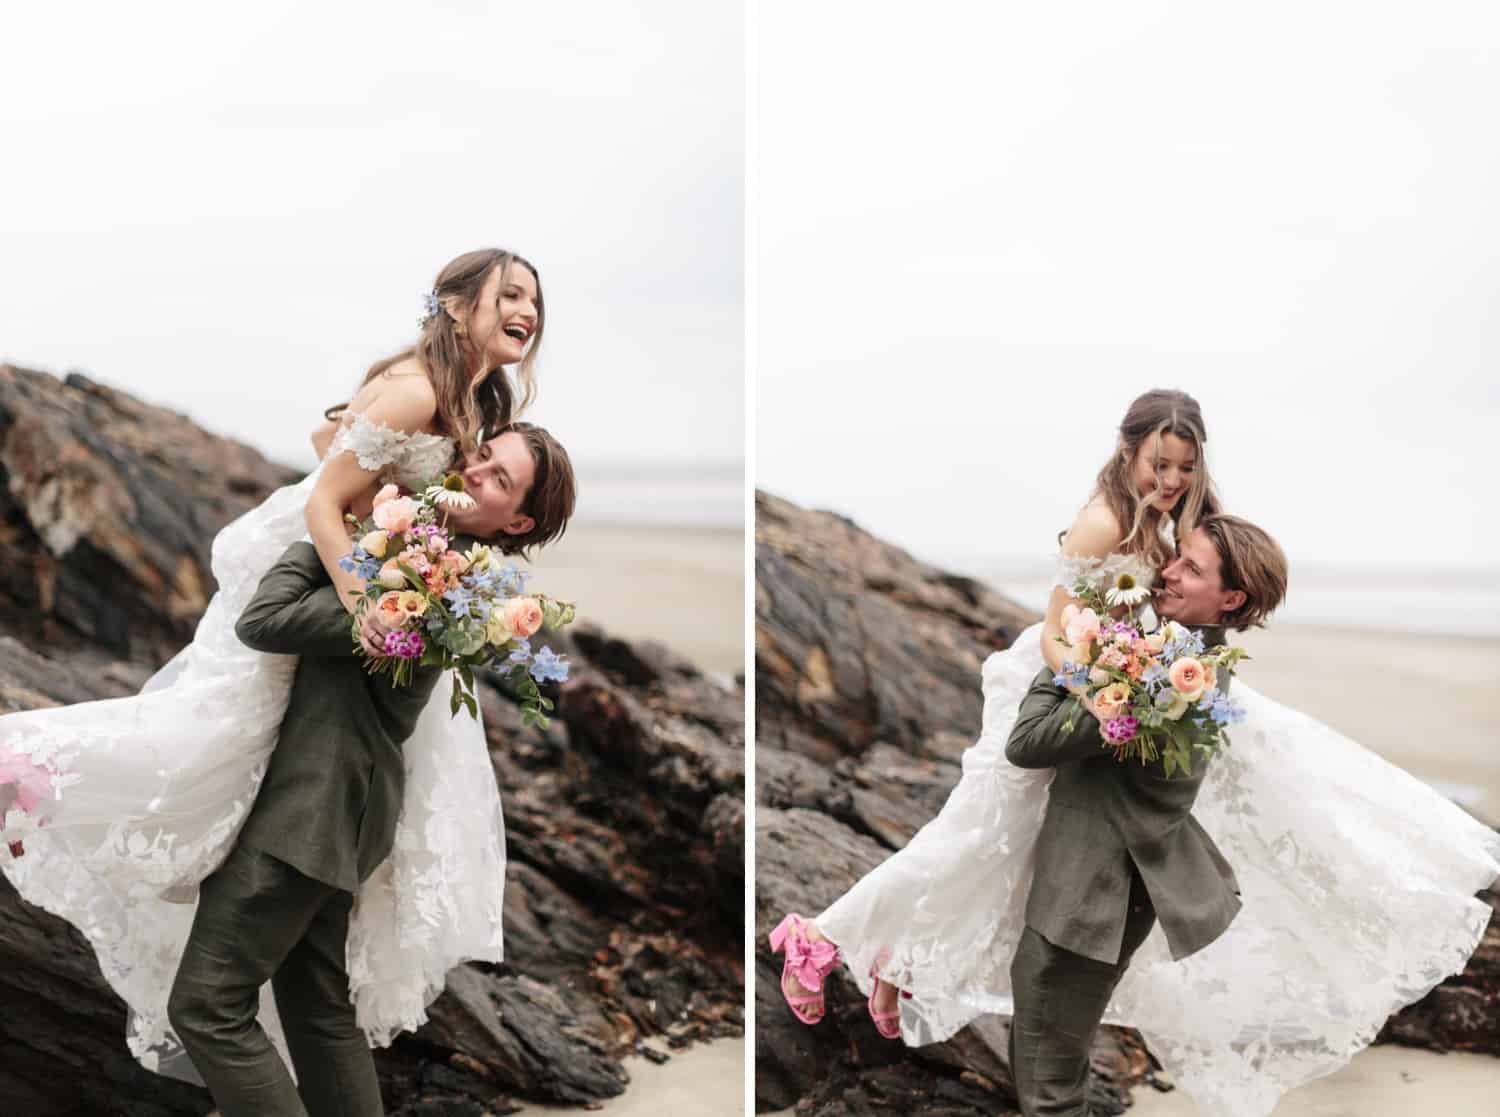 Mid-coast Maine wedding at Small Point Club. Film Wedding Photography by Maine Wedding Photographers the Light and Color.